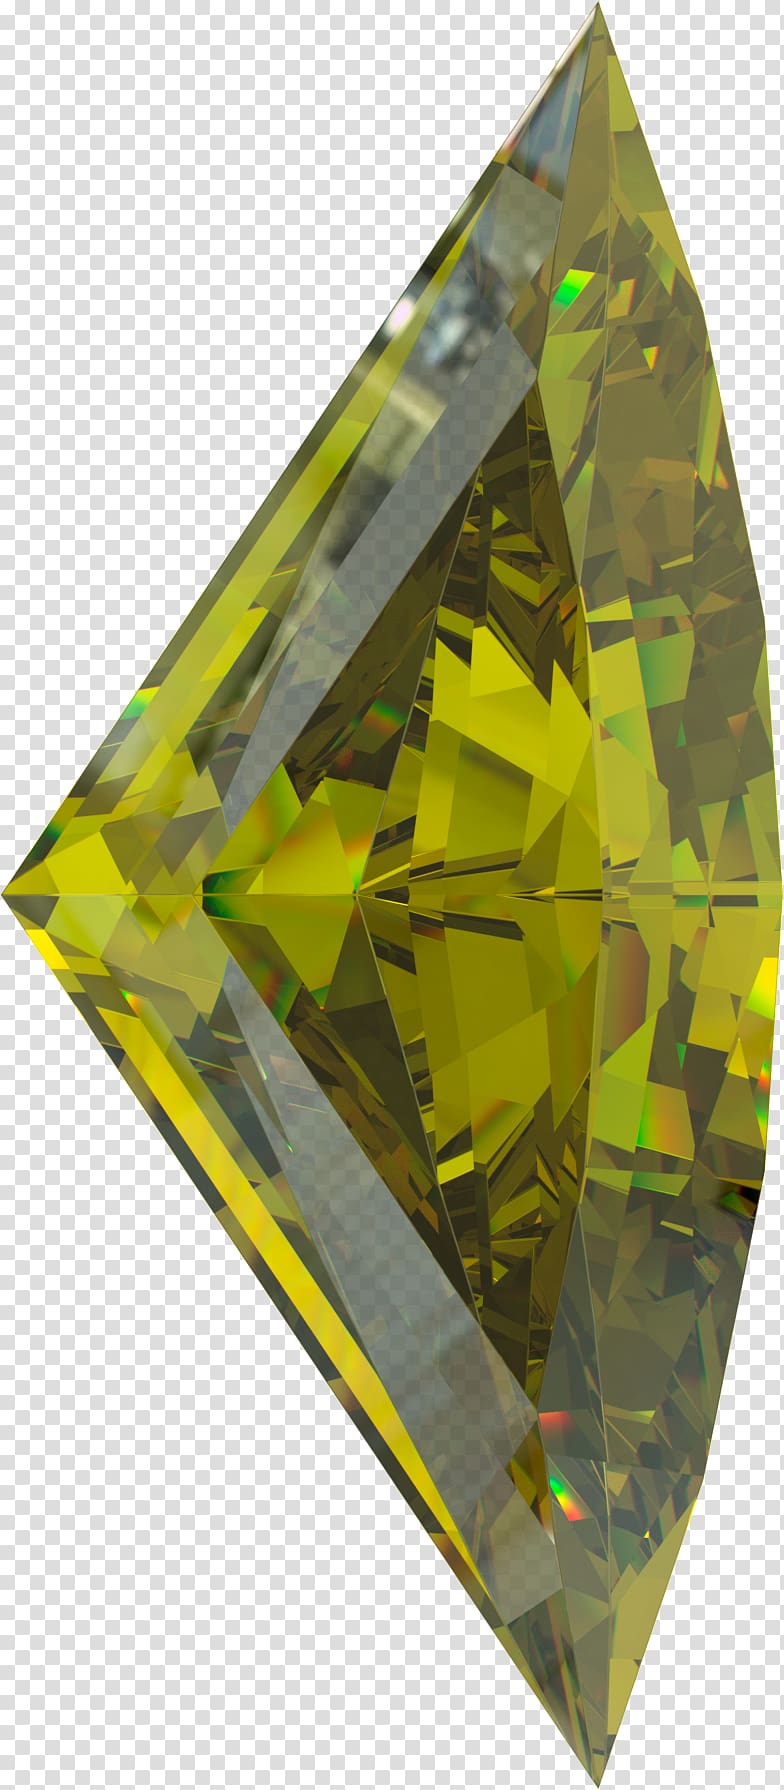 Crystal Gemstone Triangle, modified transparent background PNG clipart